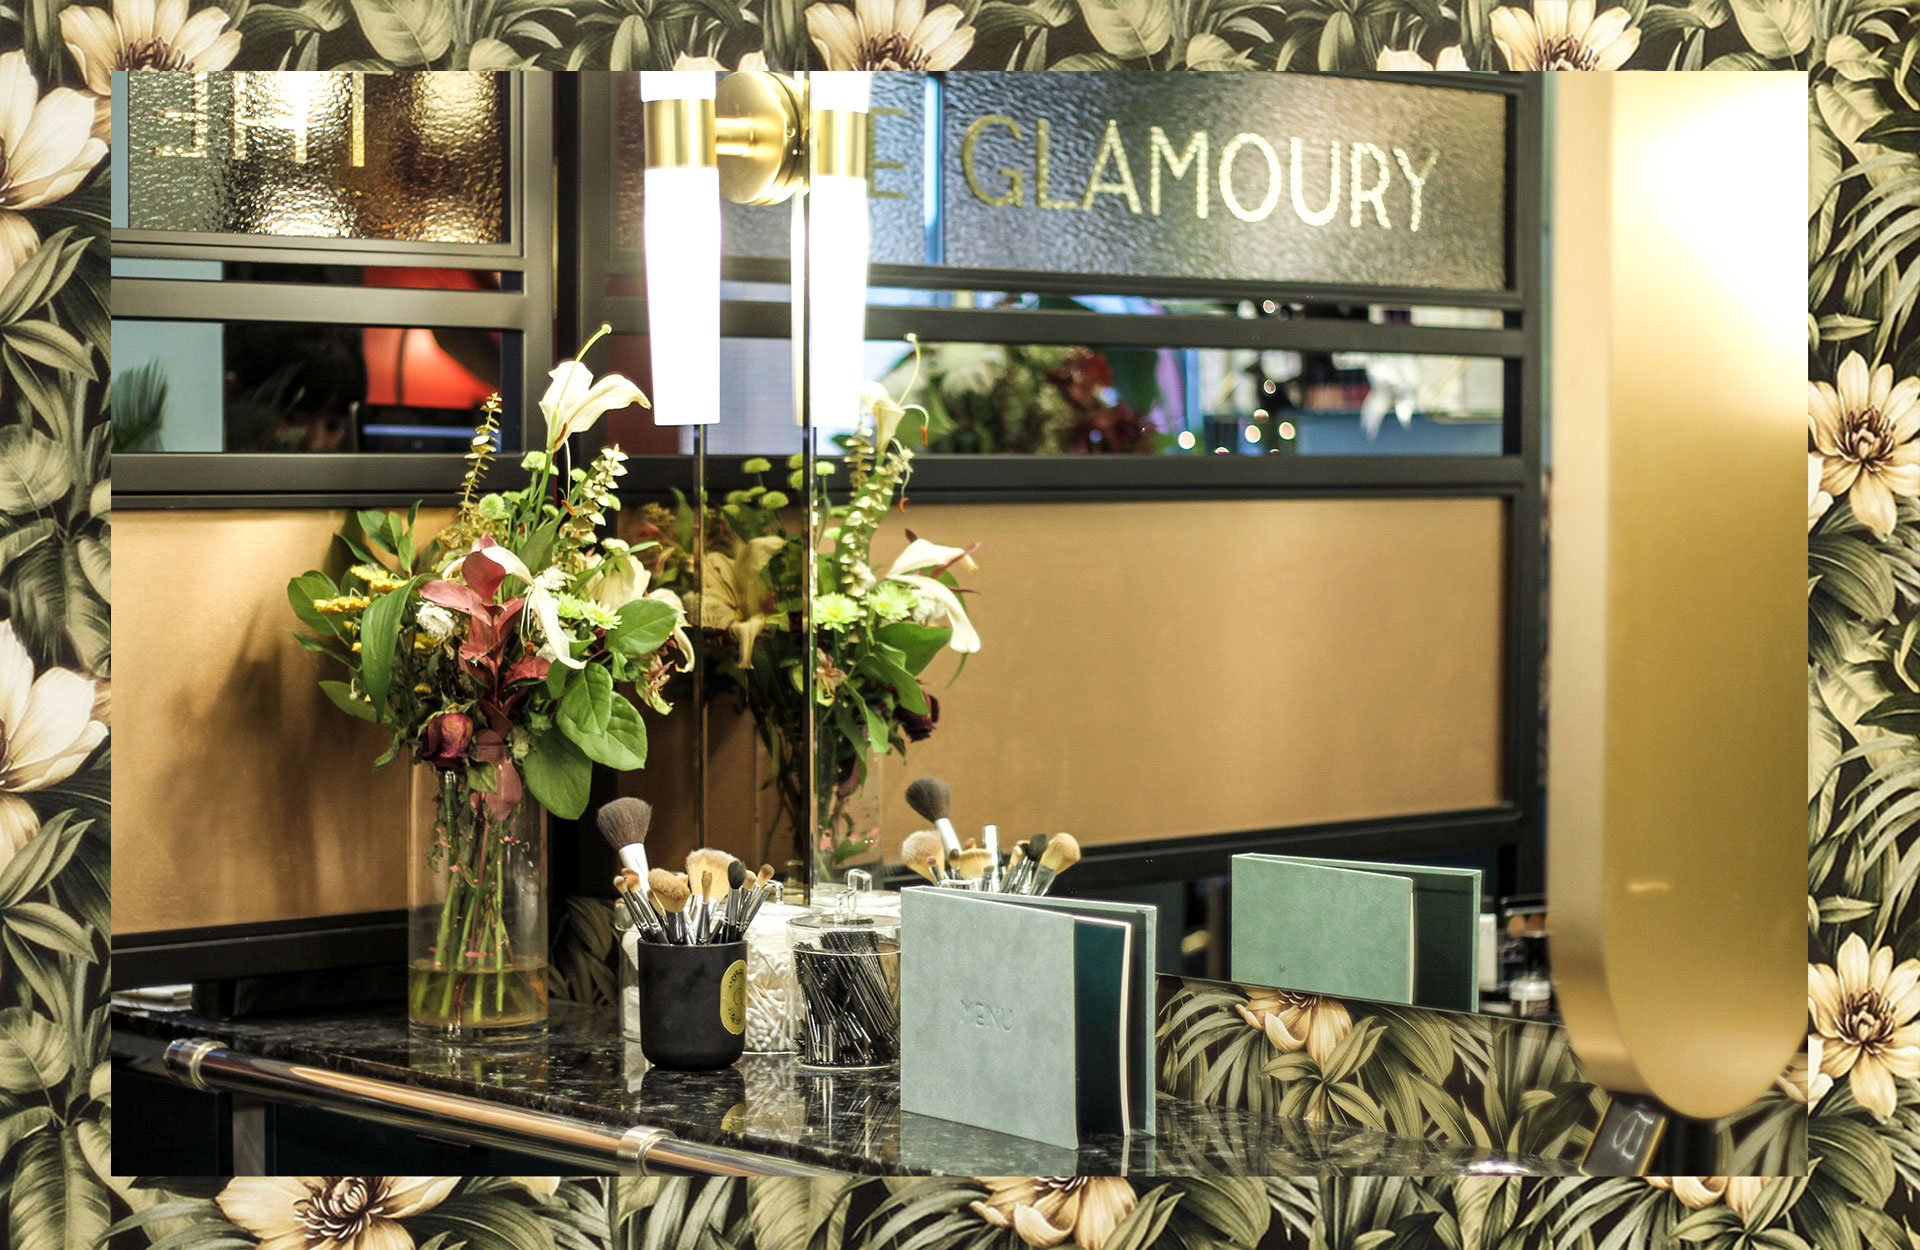 Blanche Macdonald Freelance Makeup Graduate AJ Woodworth brings Sophistication to Yaletown with The Glamoury